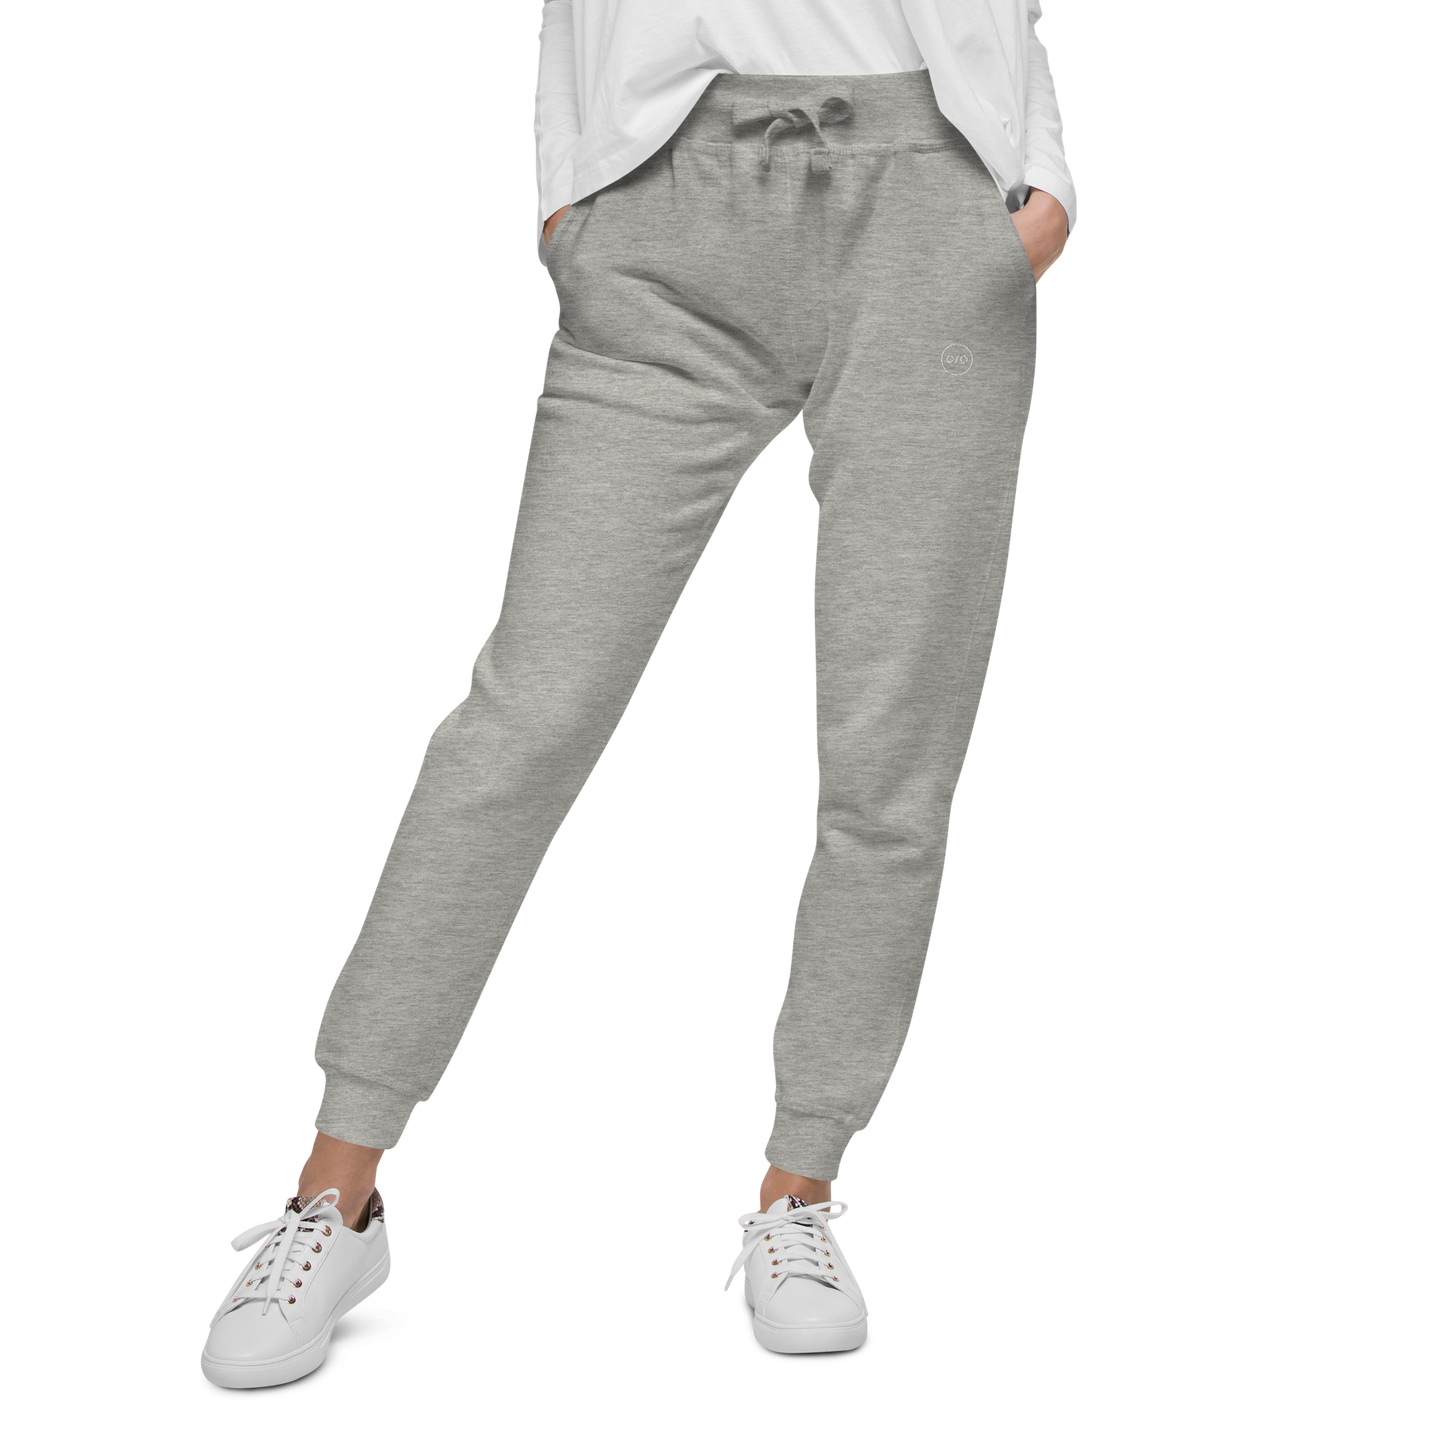 Neue Supply Co. Women's Performance Jogger in Grey